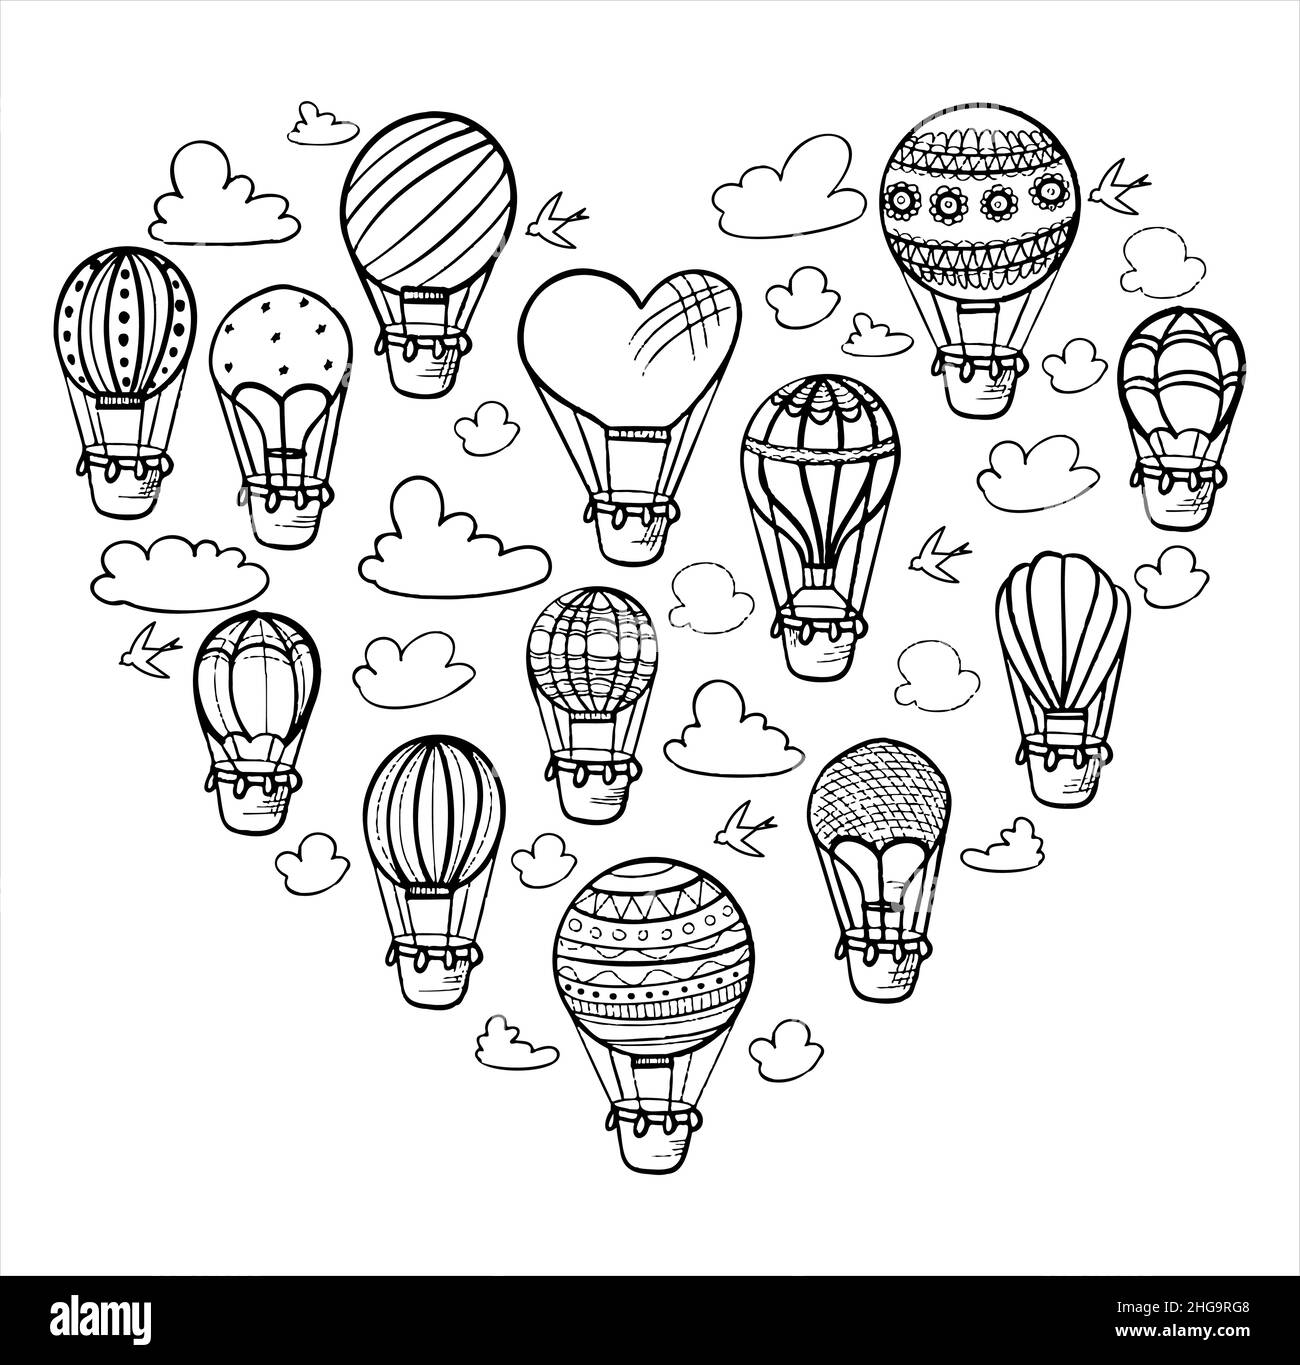 Doodle vector set of hot air balloons with clouds. Colorful hand draw illustration flying vehicles. Romantic balloons. Sky with tourist balloons for Stock Vector